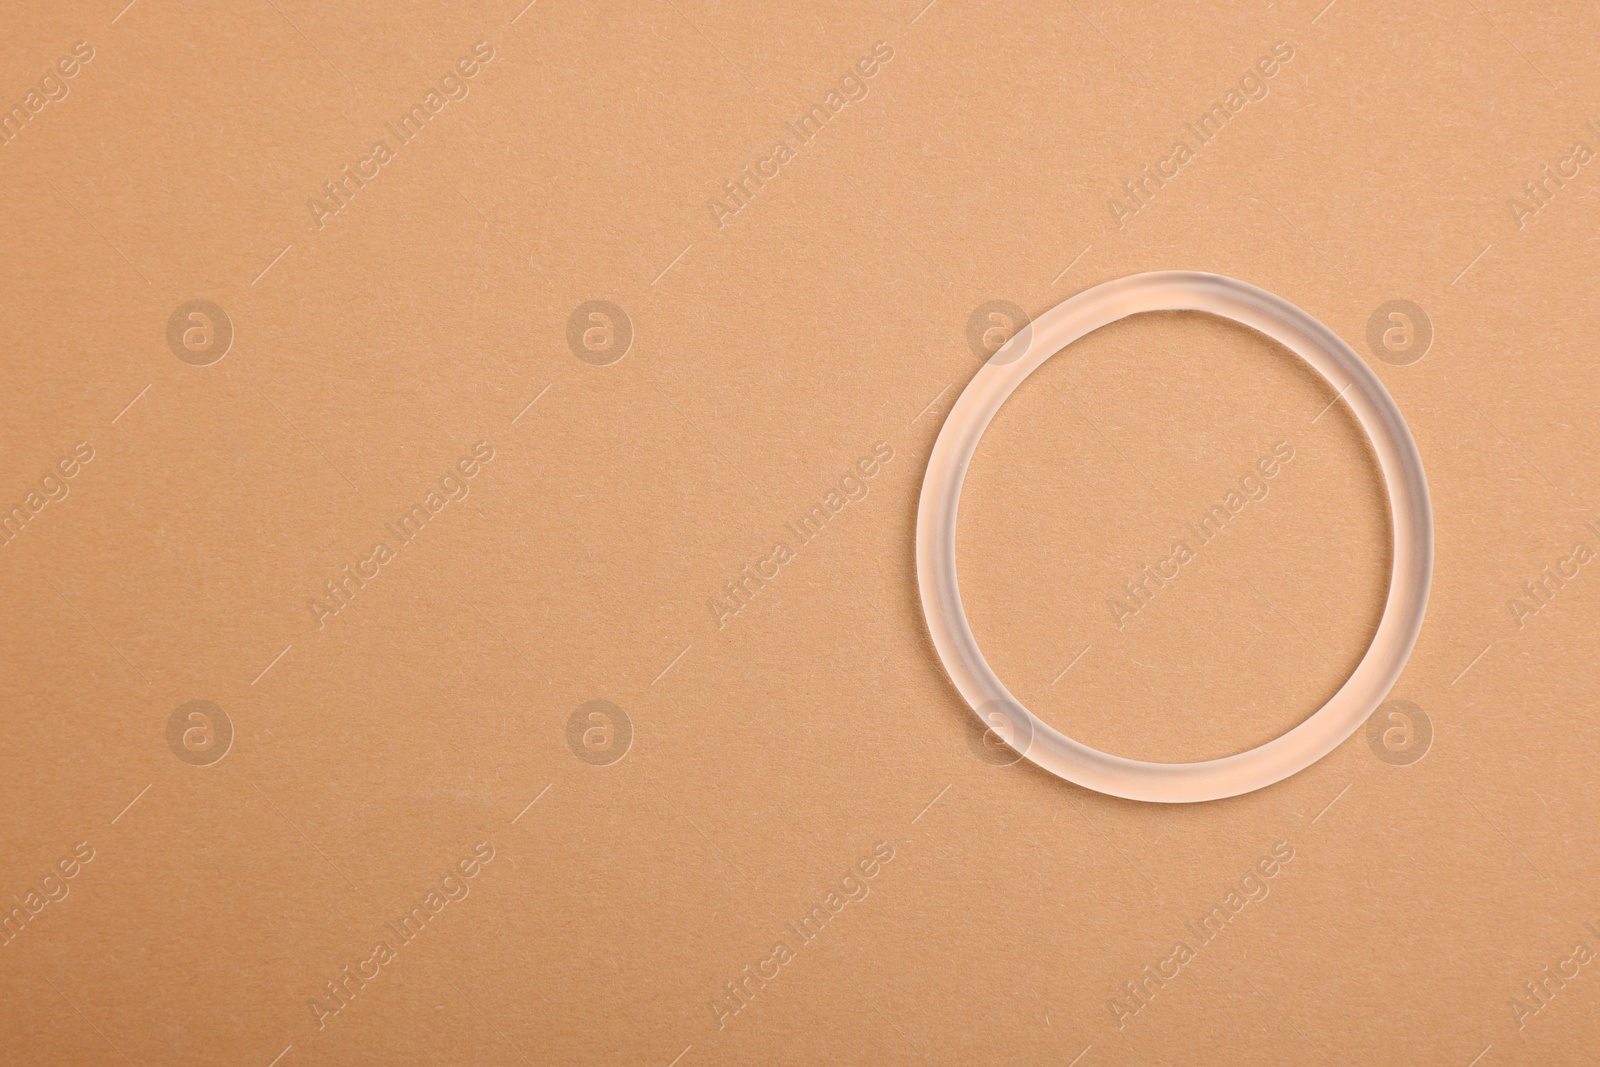 Photo of Diaphragm vaginal contraceptive ring on beige background, top view. Space for text